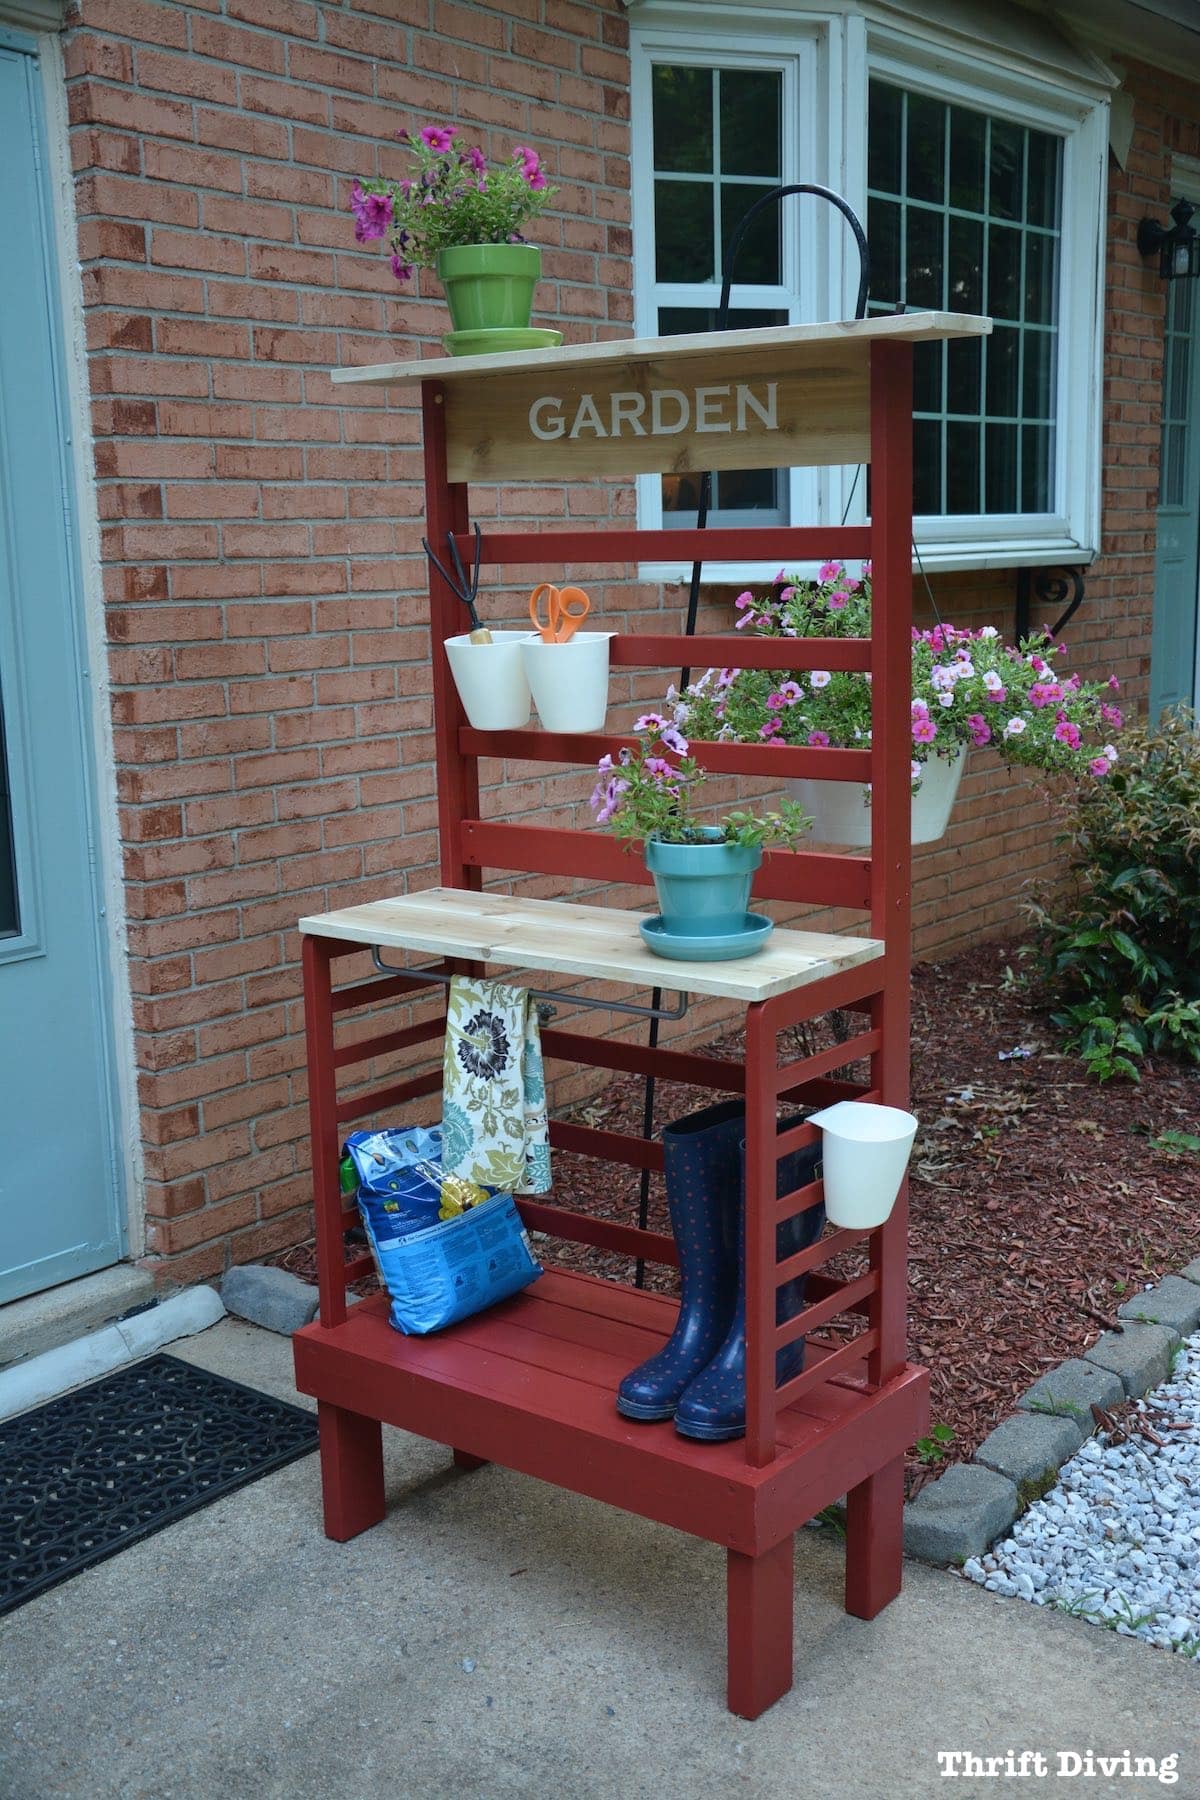 Repurposed toddler bed: What to do with an old toddler bed - Turn a toddler bed into a garden bench for your patio with storage and shelves for gardening. - Thrift Diving